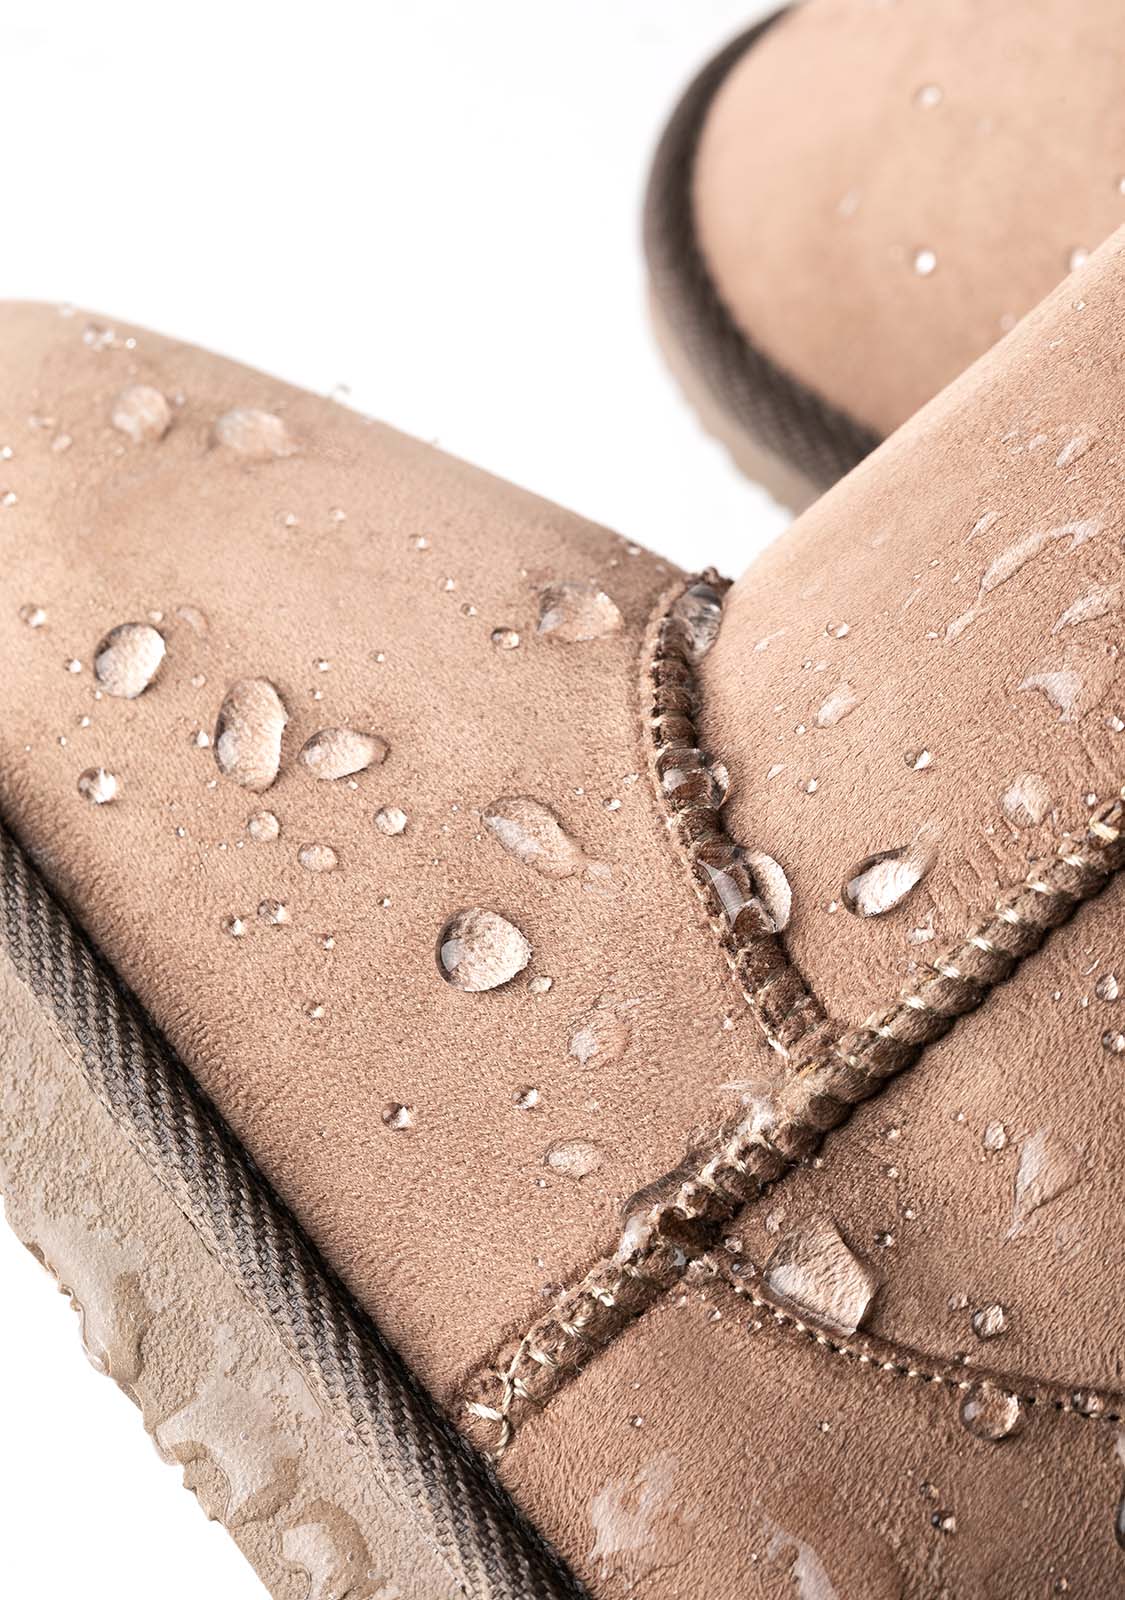 Taupe Logo Australian Boots Water Repellent